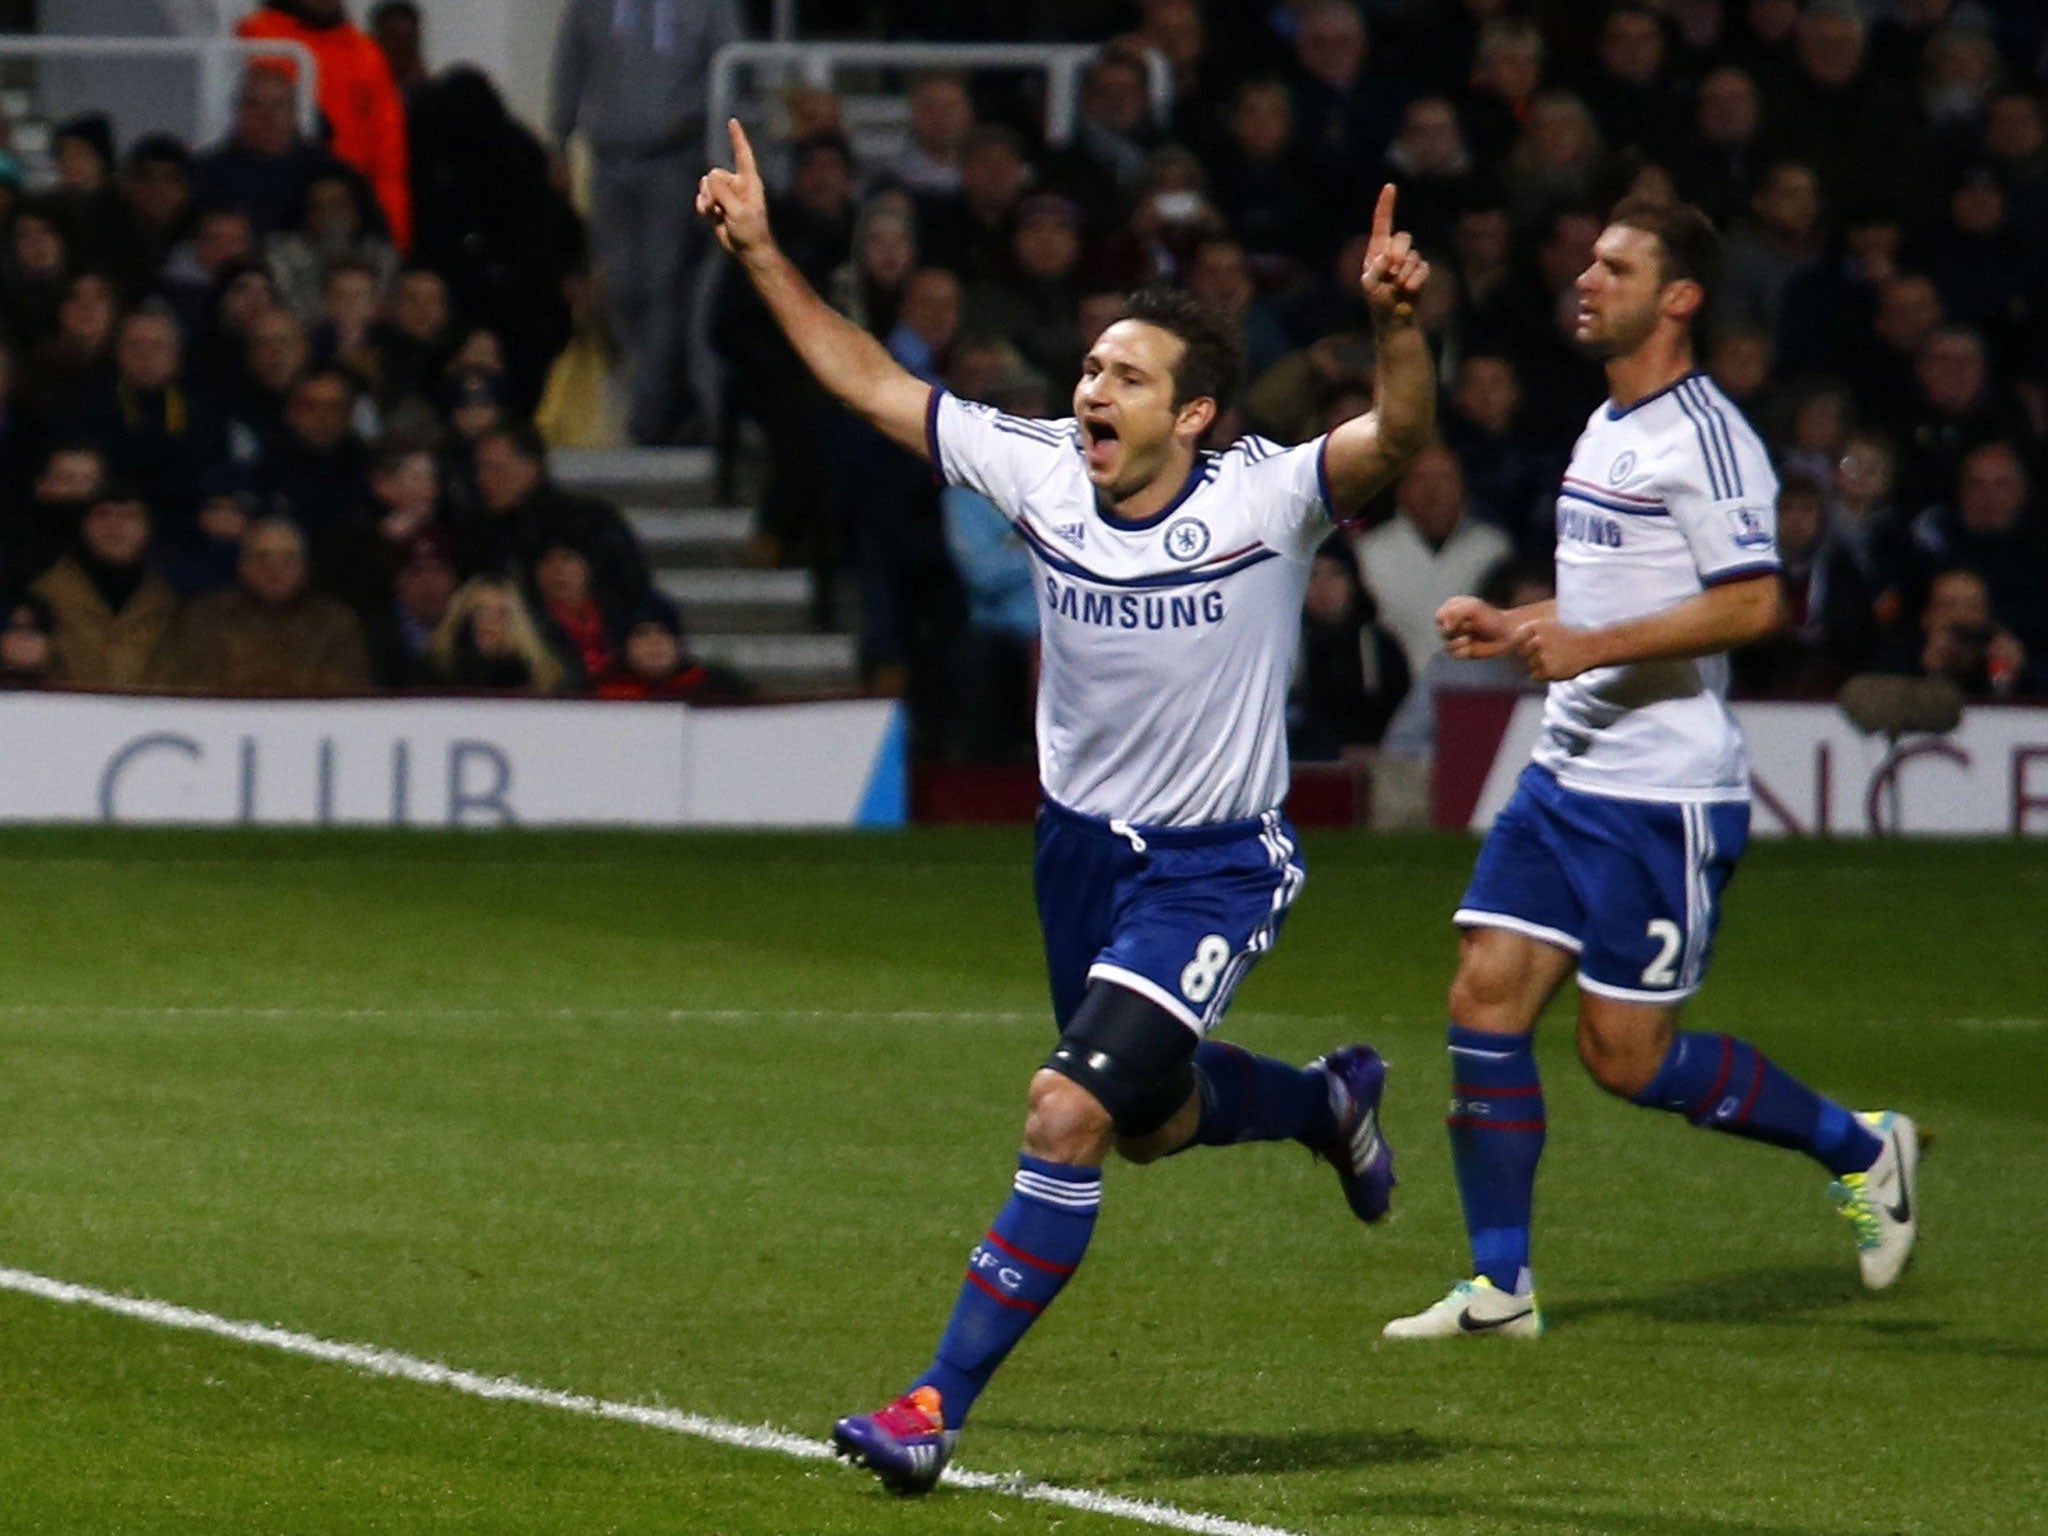 Frank Lampard celebrates after scoring from the penalty spot